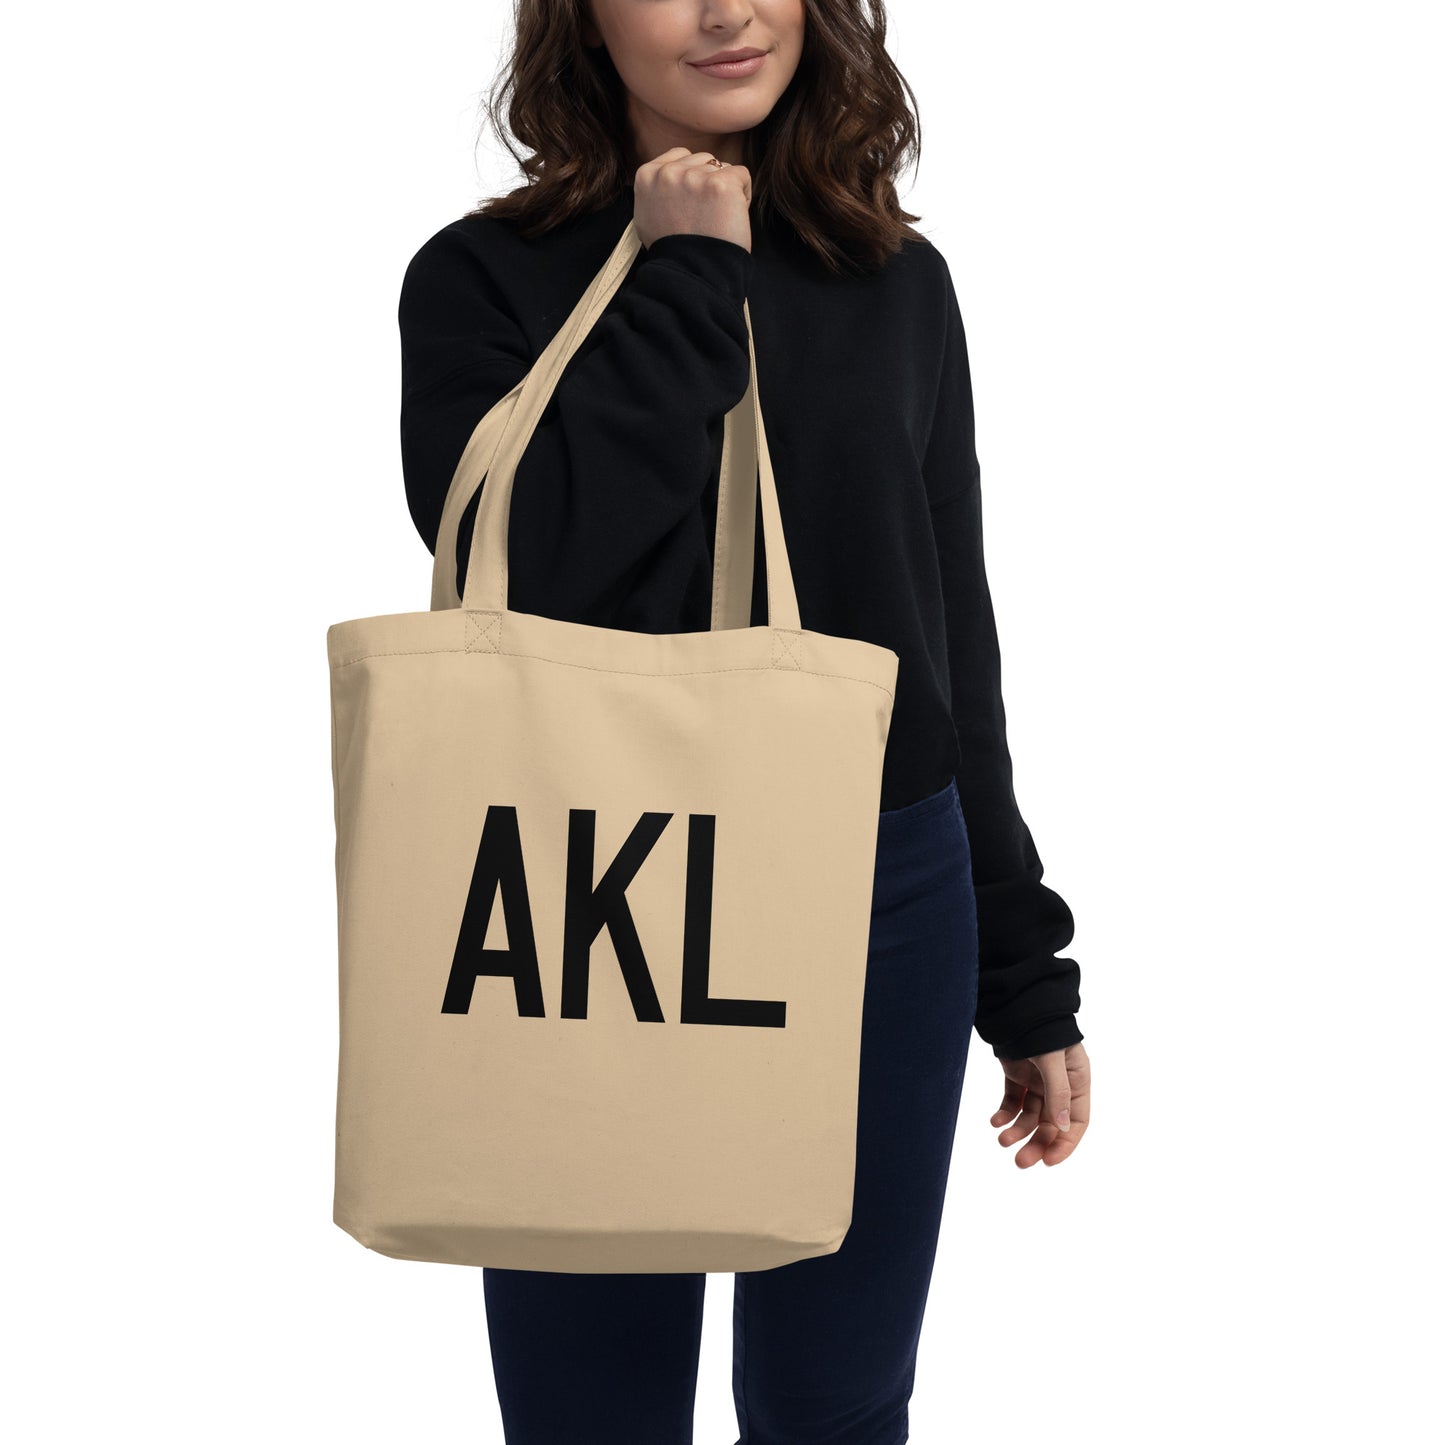 Aviation Gift Organic Tote - Black • AKL Auckland • YHM Designs - Image 03